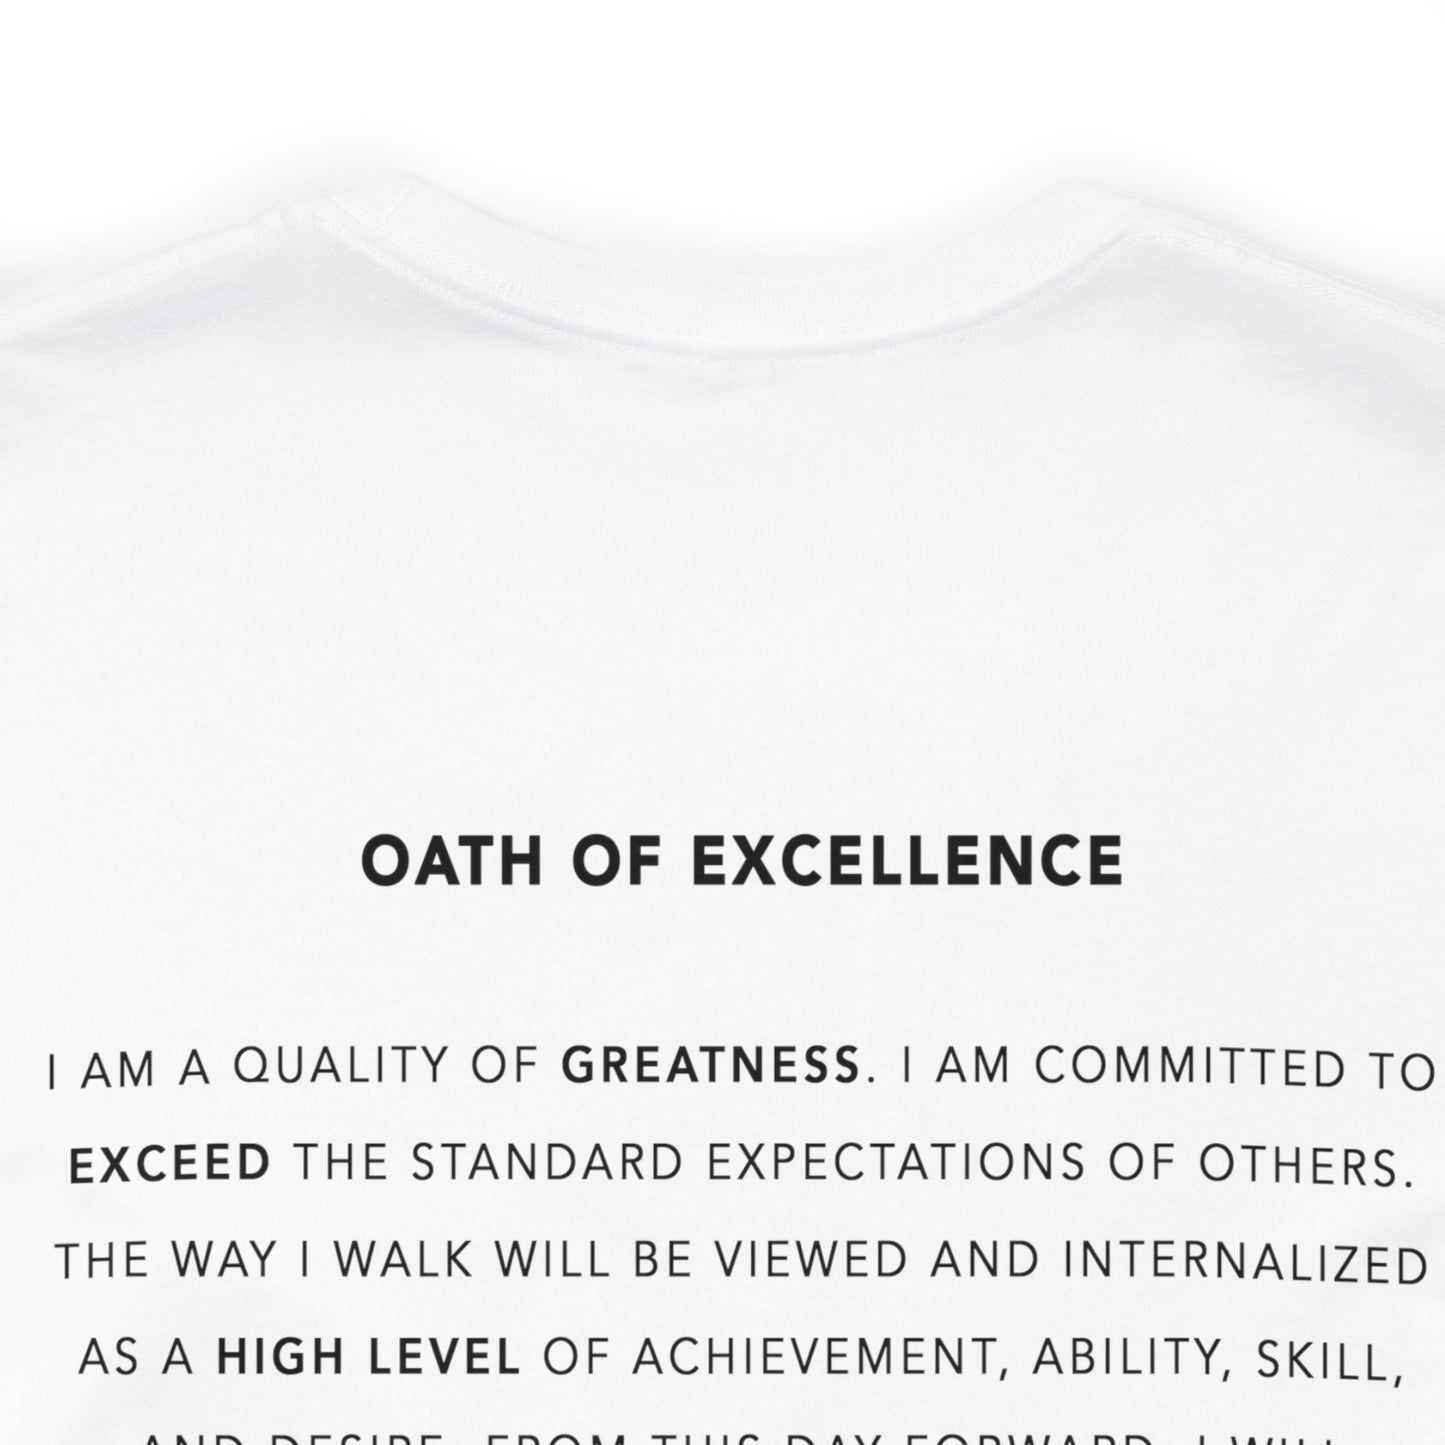 Excellence T-Shirt